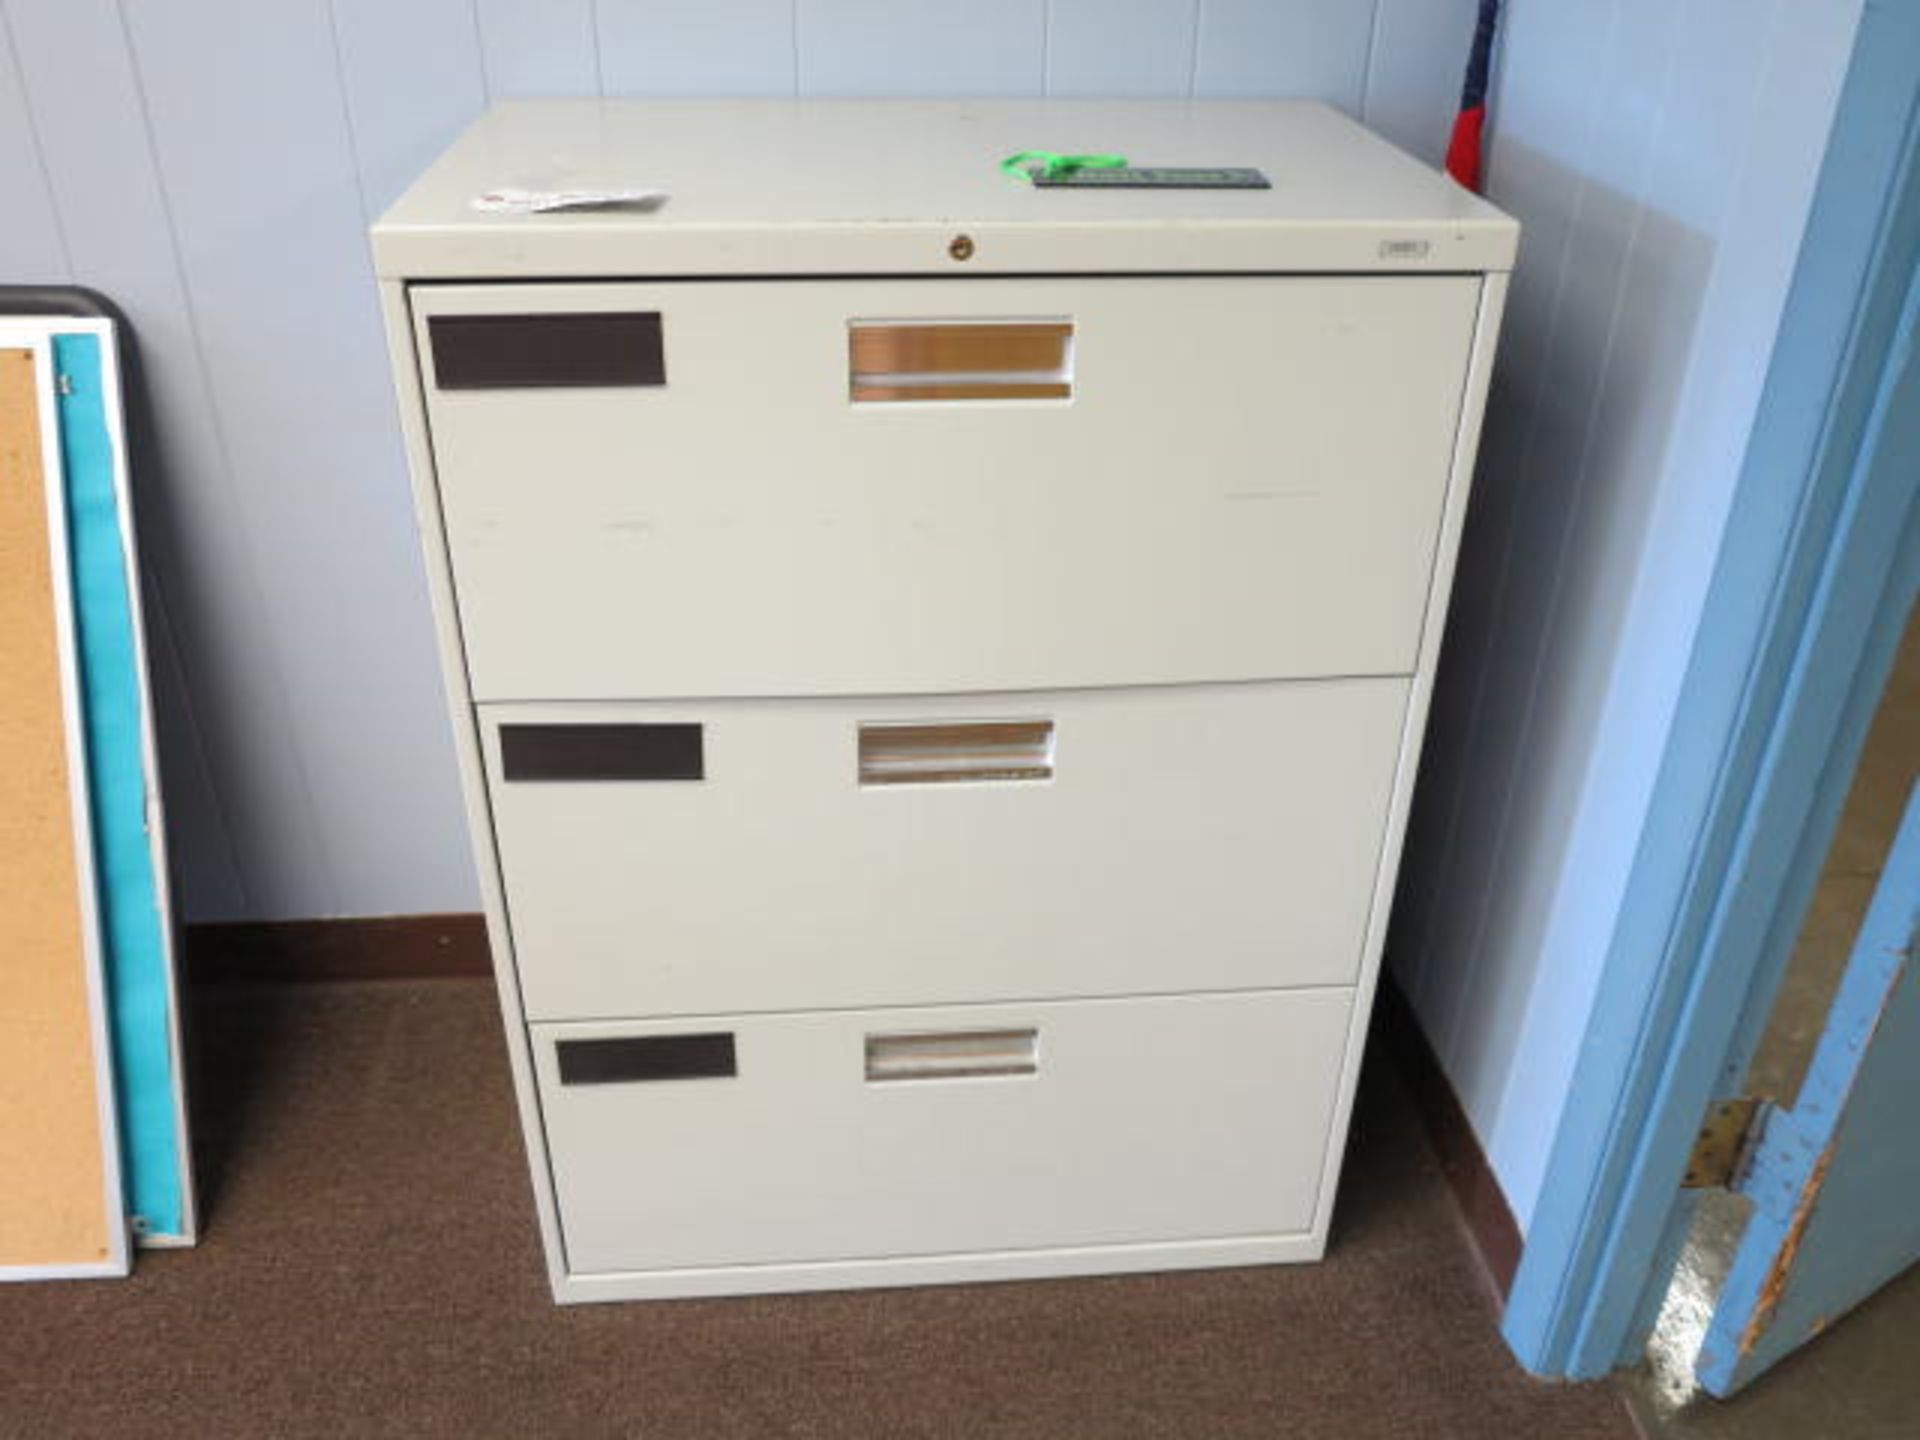 Hon 3 Drawer Vertical Filing Cabinet Located in Room 19